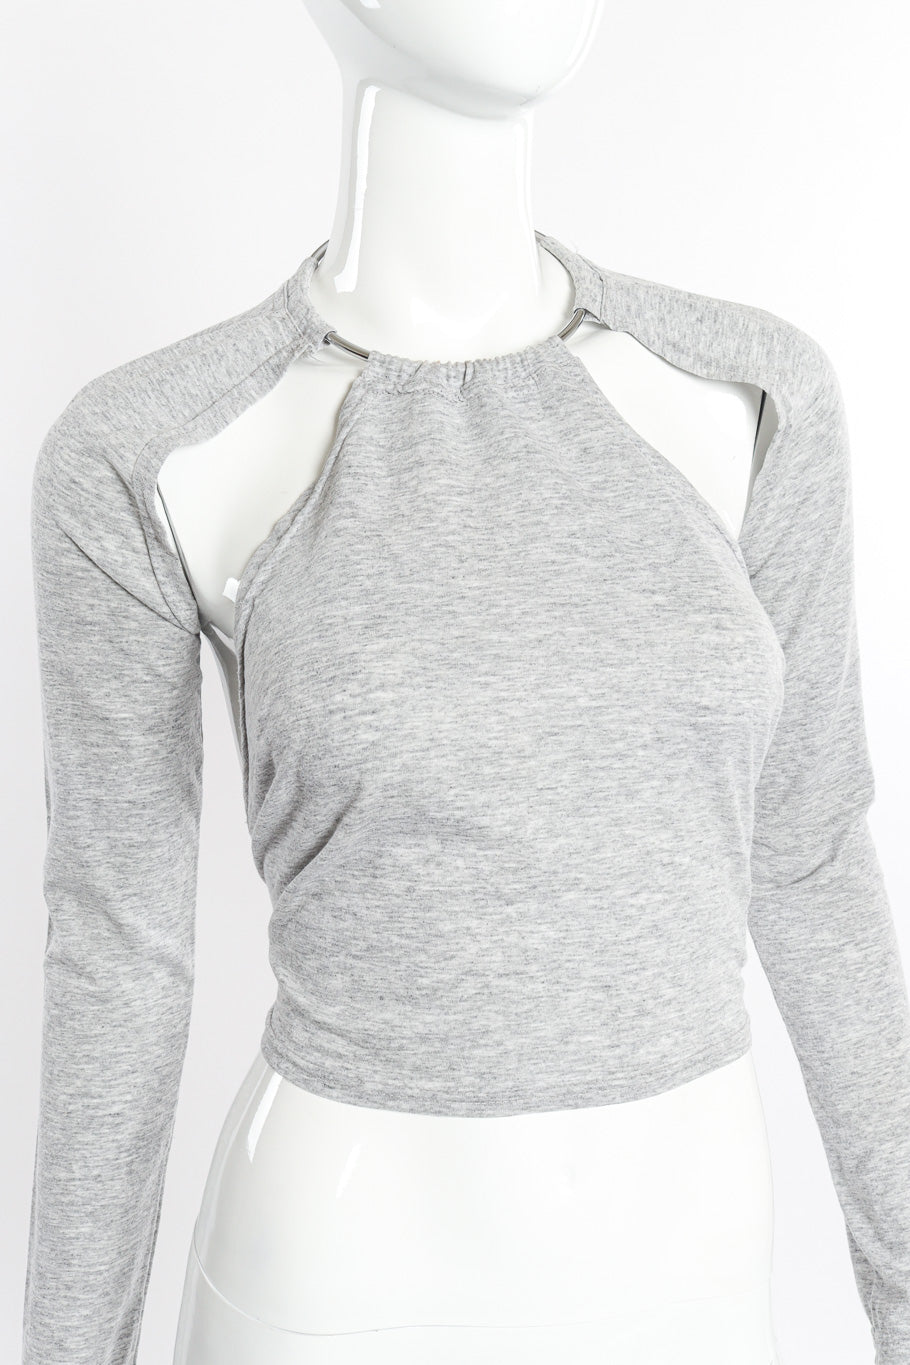 Cut-Out Sleeve Ring Collar Halter Top by Margiela on mannequin chest close @recessla